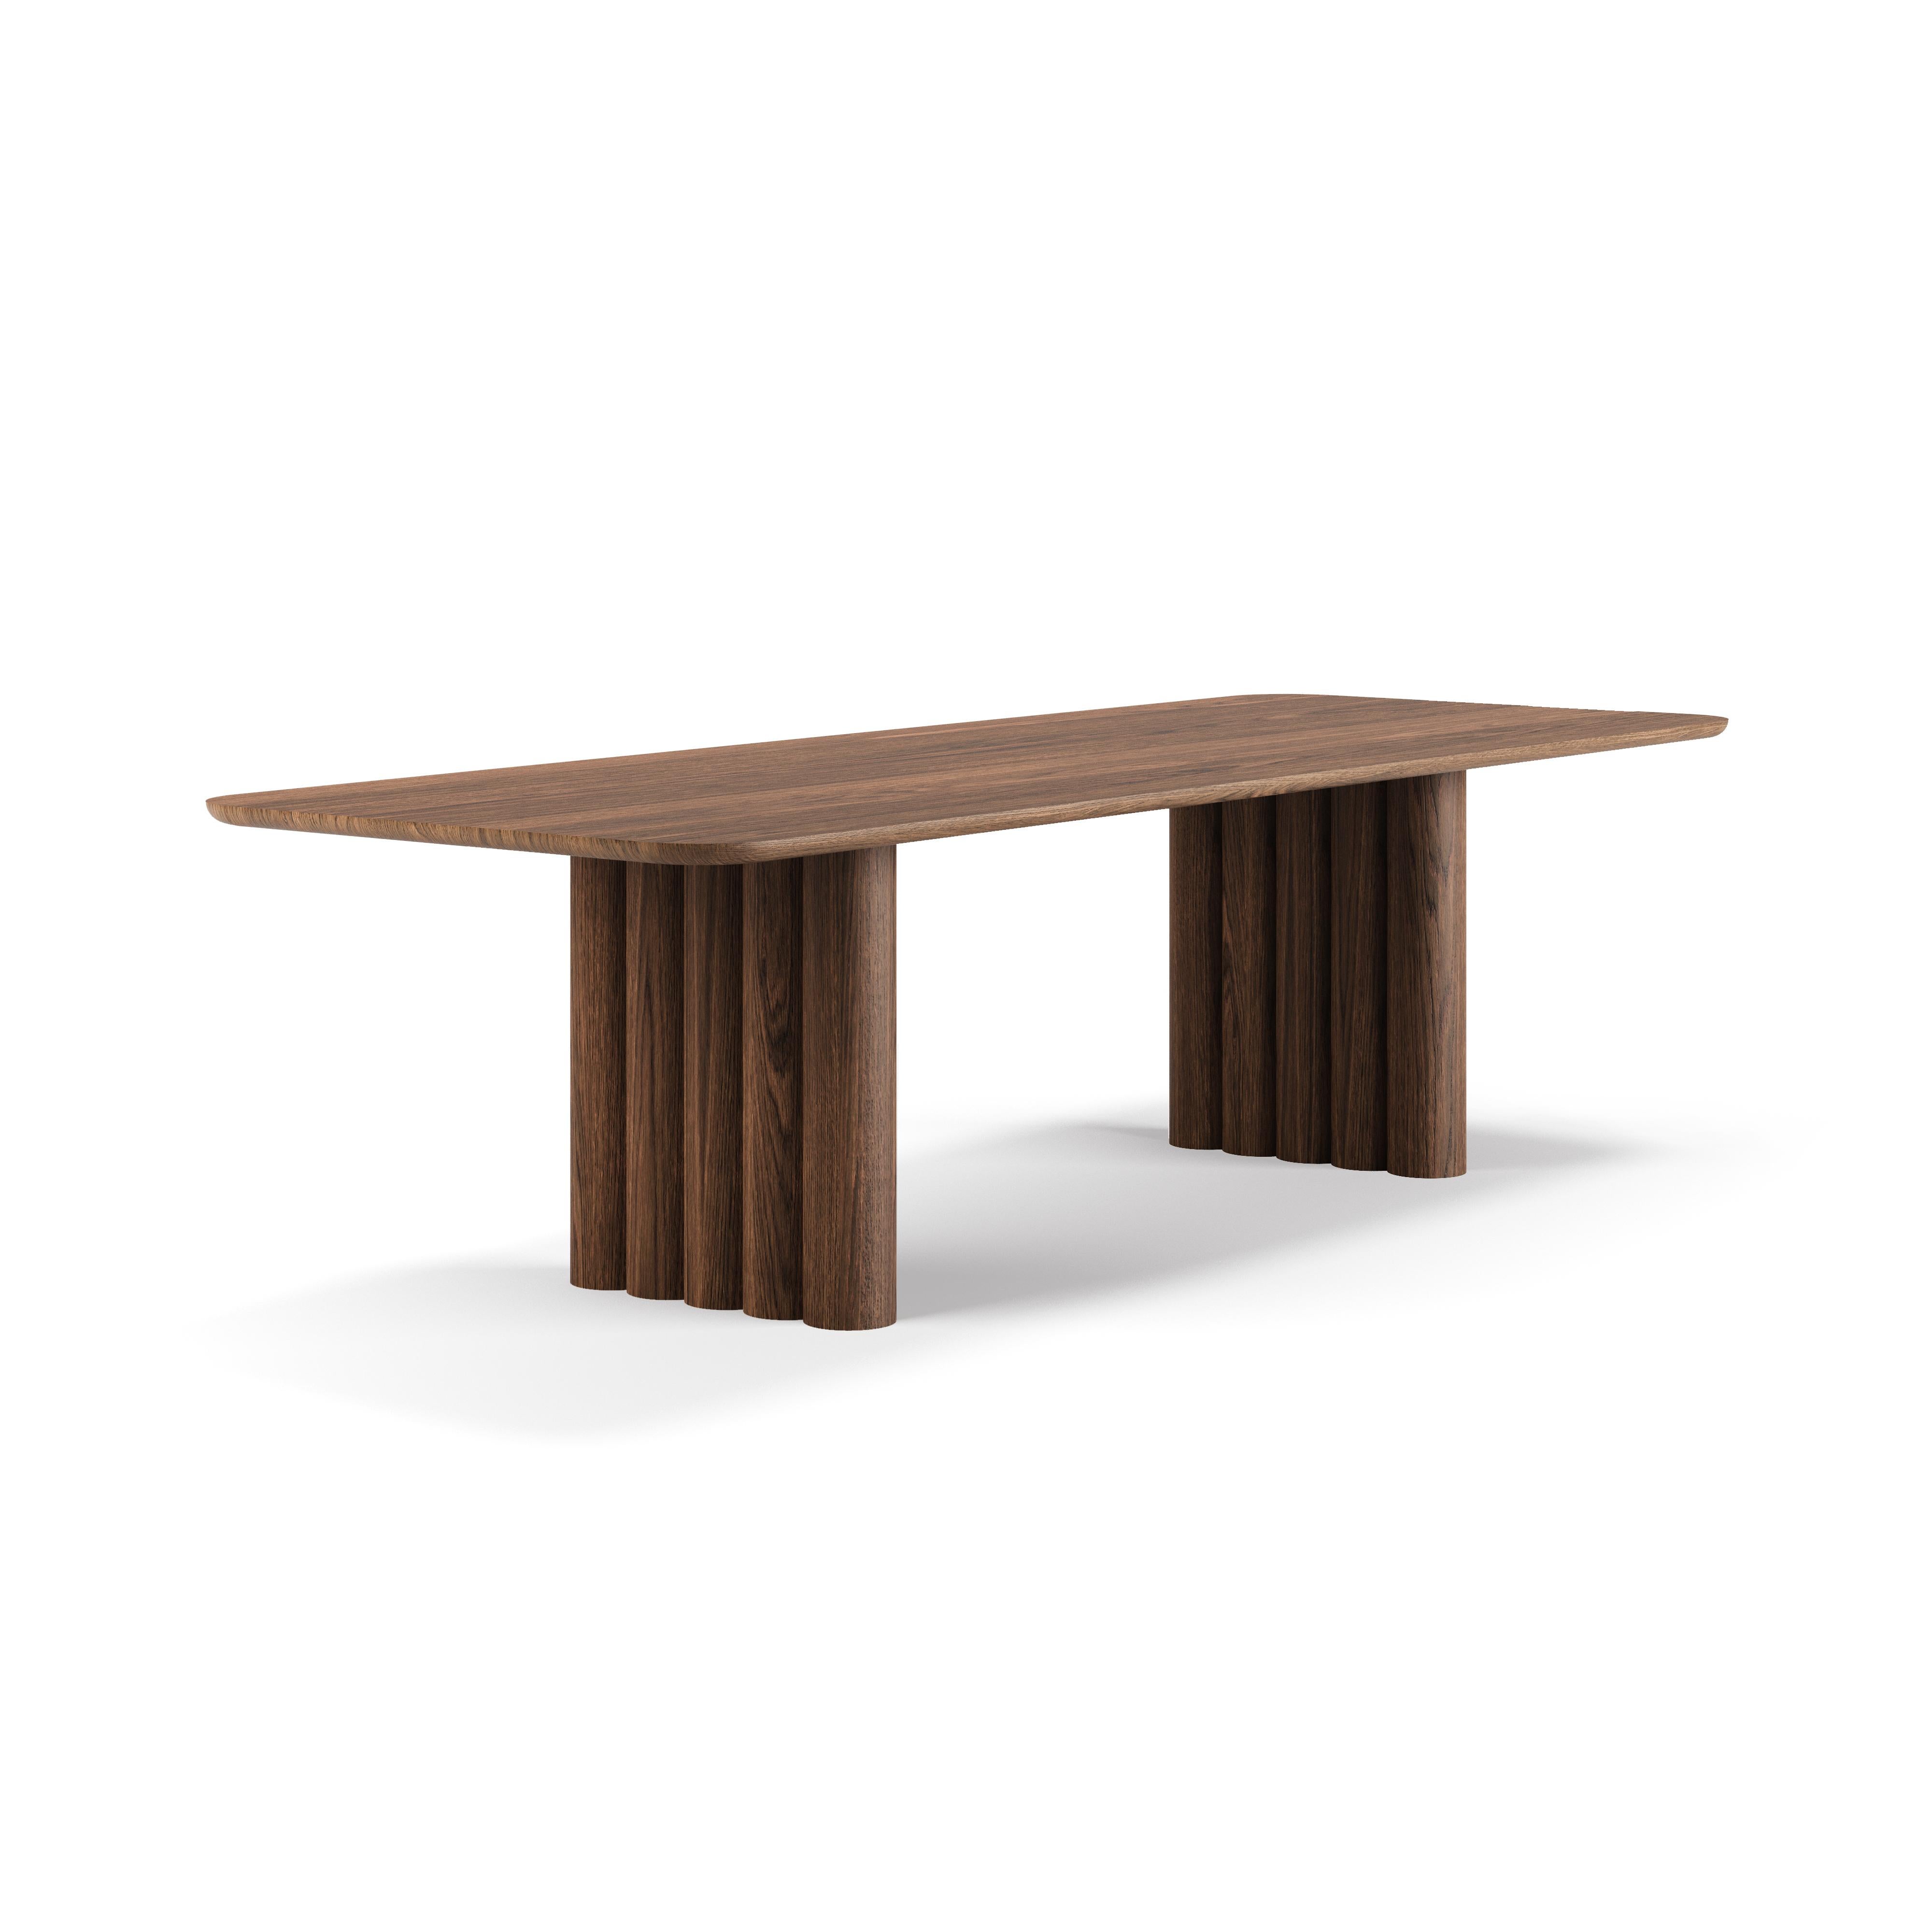 Contemporary Dining Table 'Plush' by Dk3, Smoked Oak or Walnut, 240, Rectangular For Sale 4